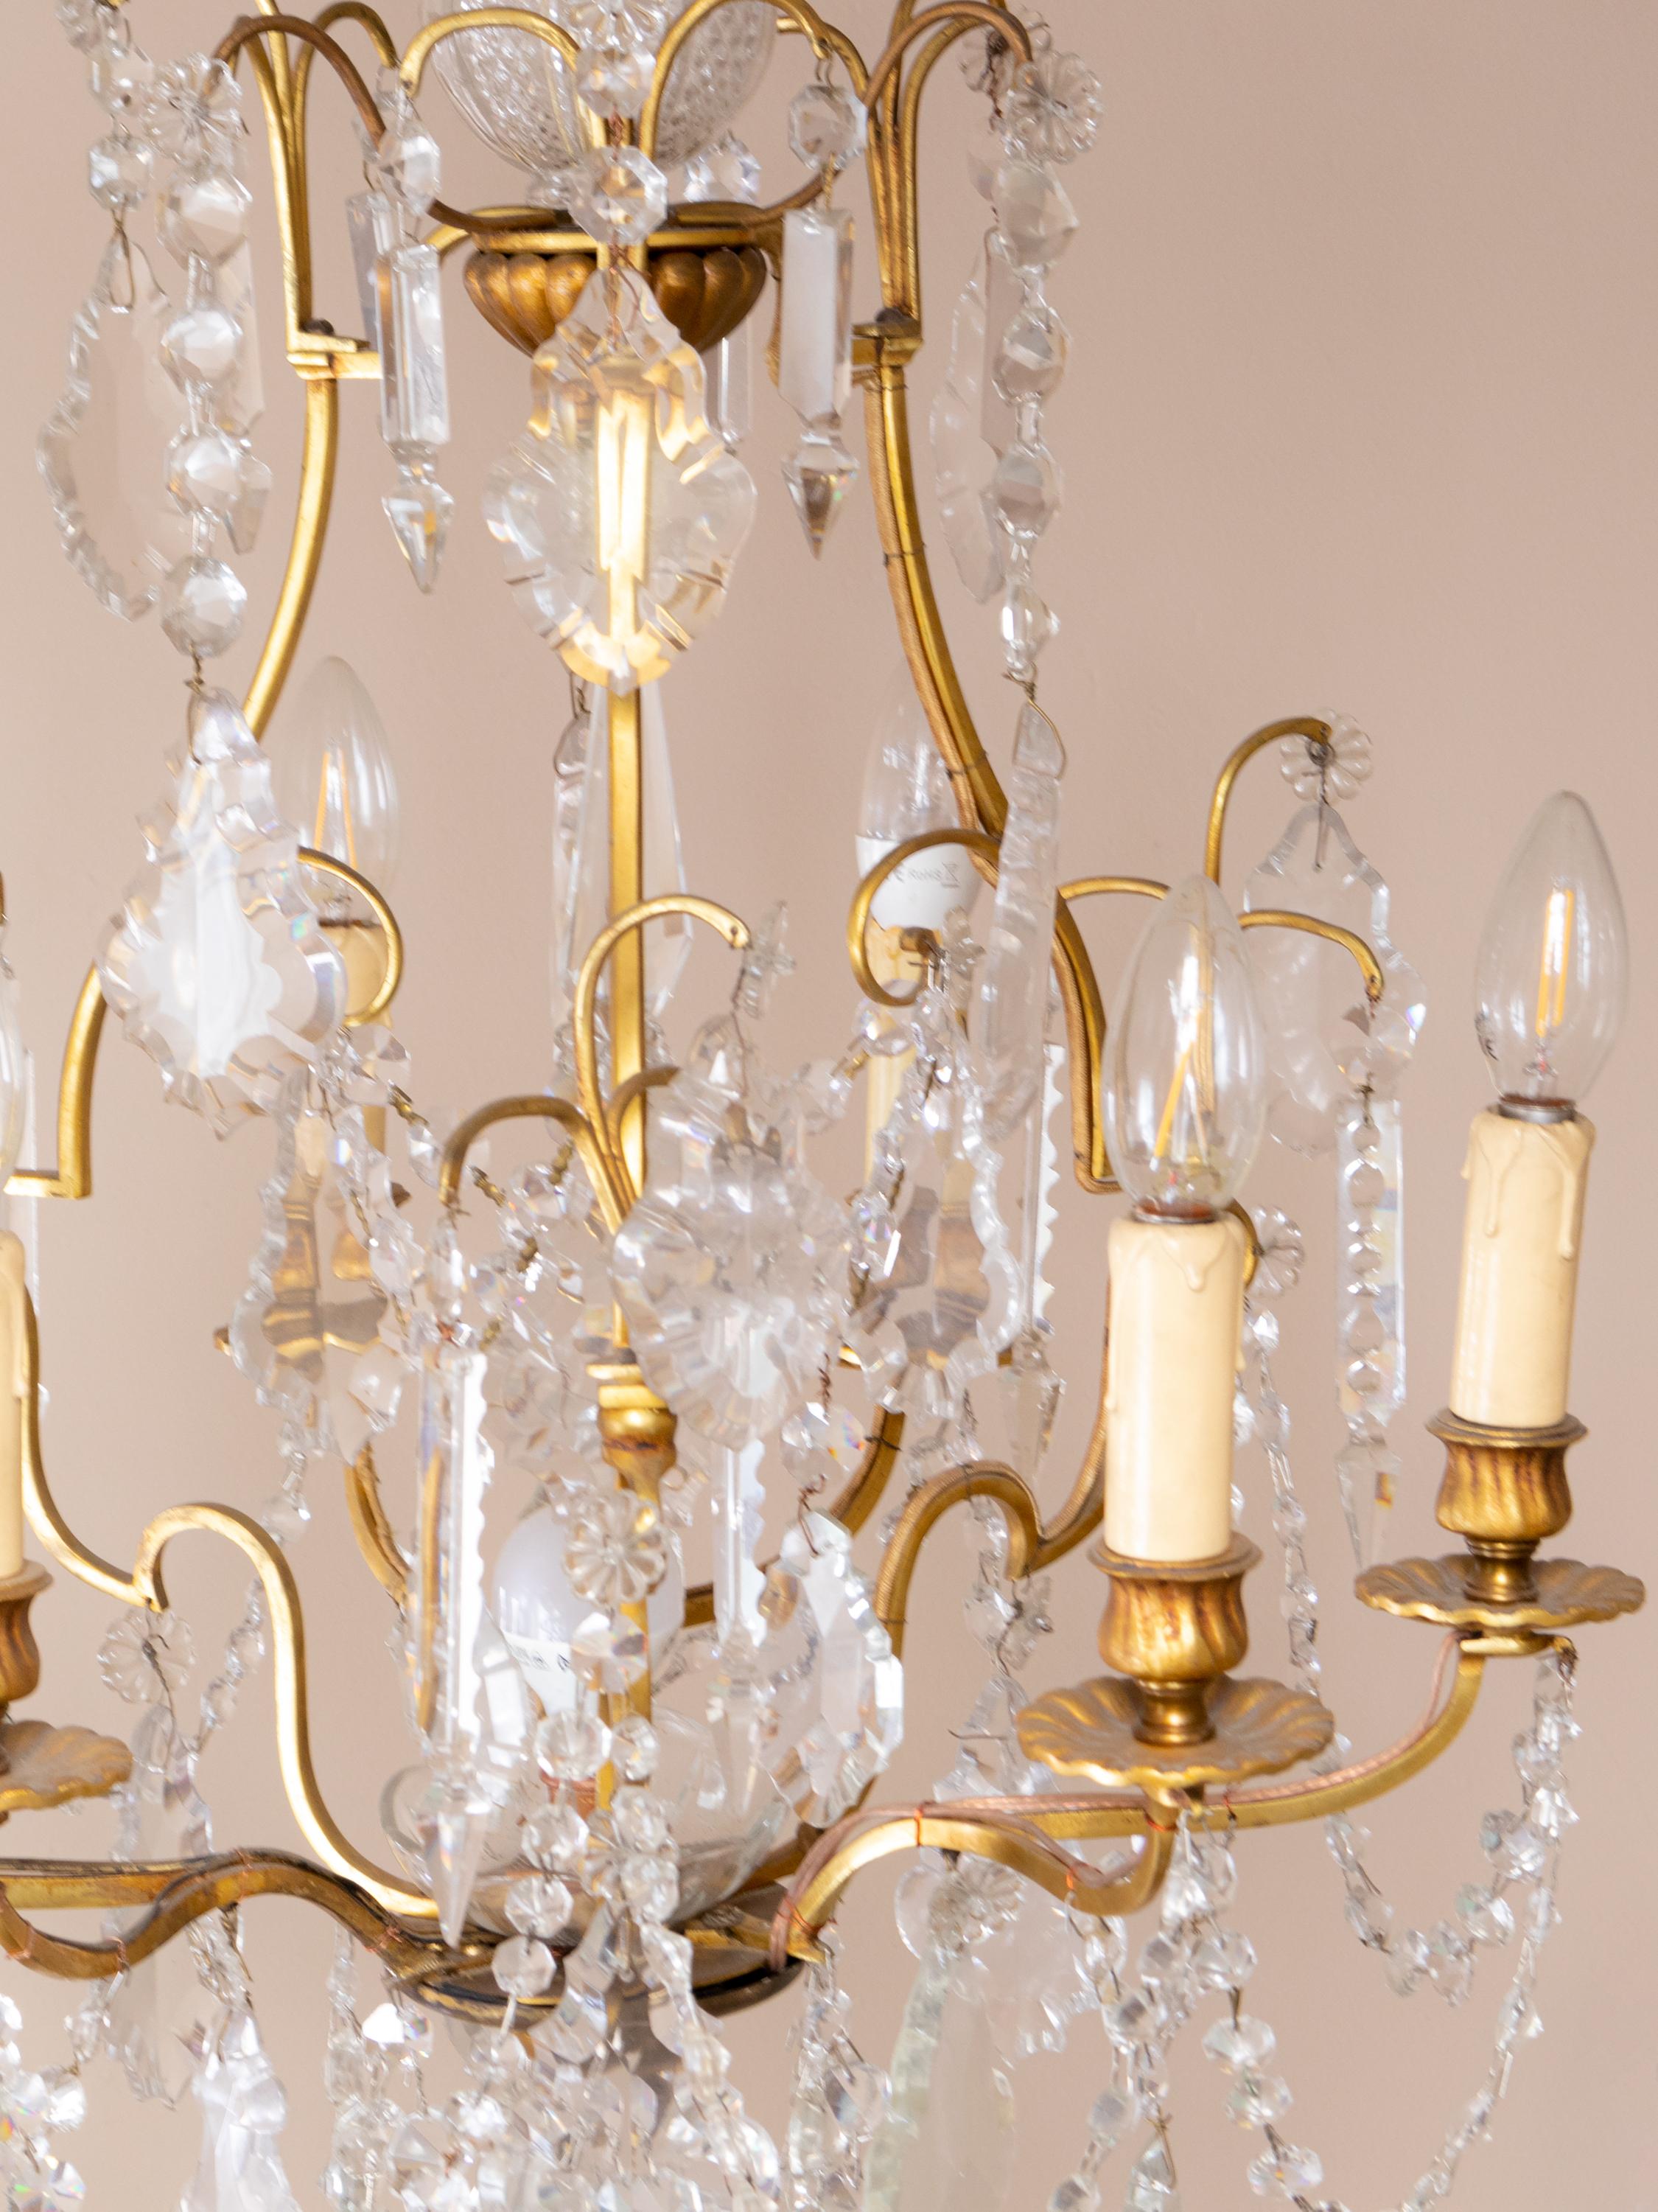 A french Louis XV-Style bronze and crystal chandelier with various crystal and glass pendants and finials, six candlestick holders fully rewired and six light sockets. 

The chandelier is currently wired for both European Union and US standards LED